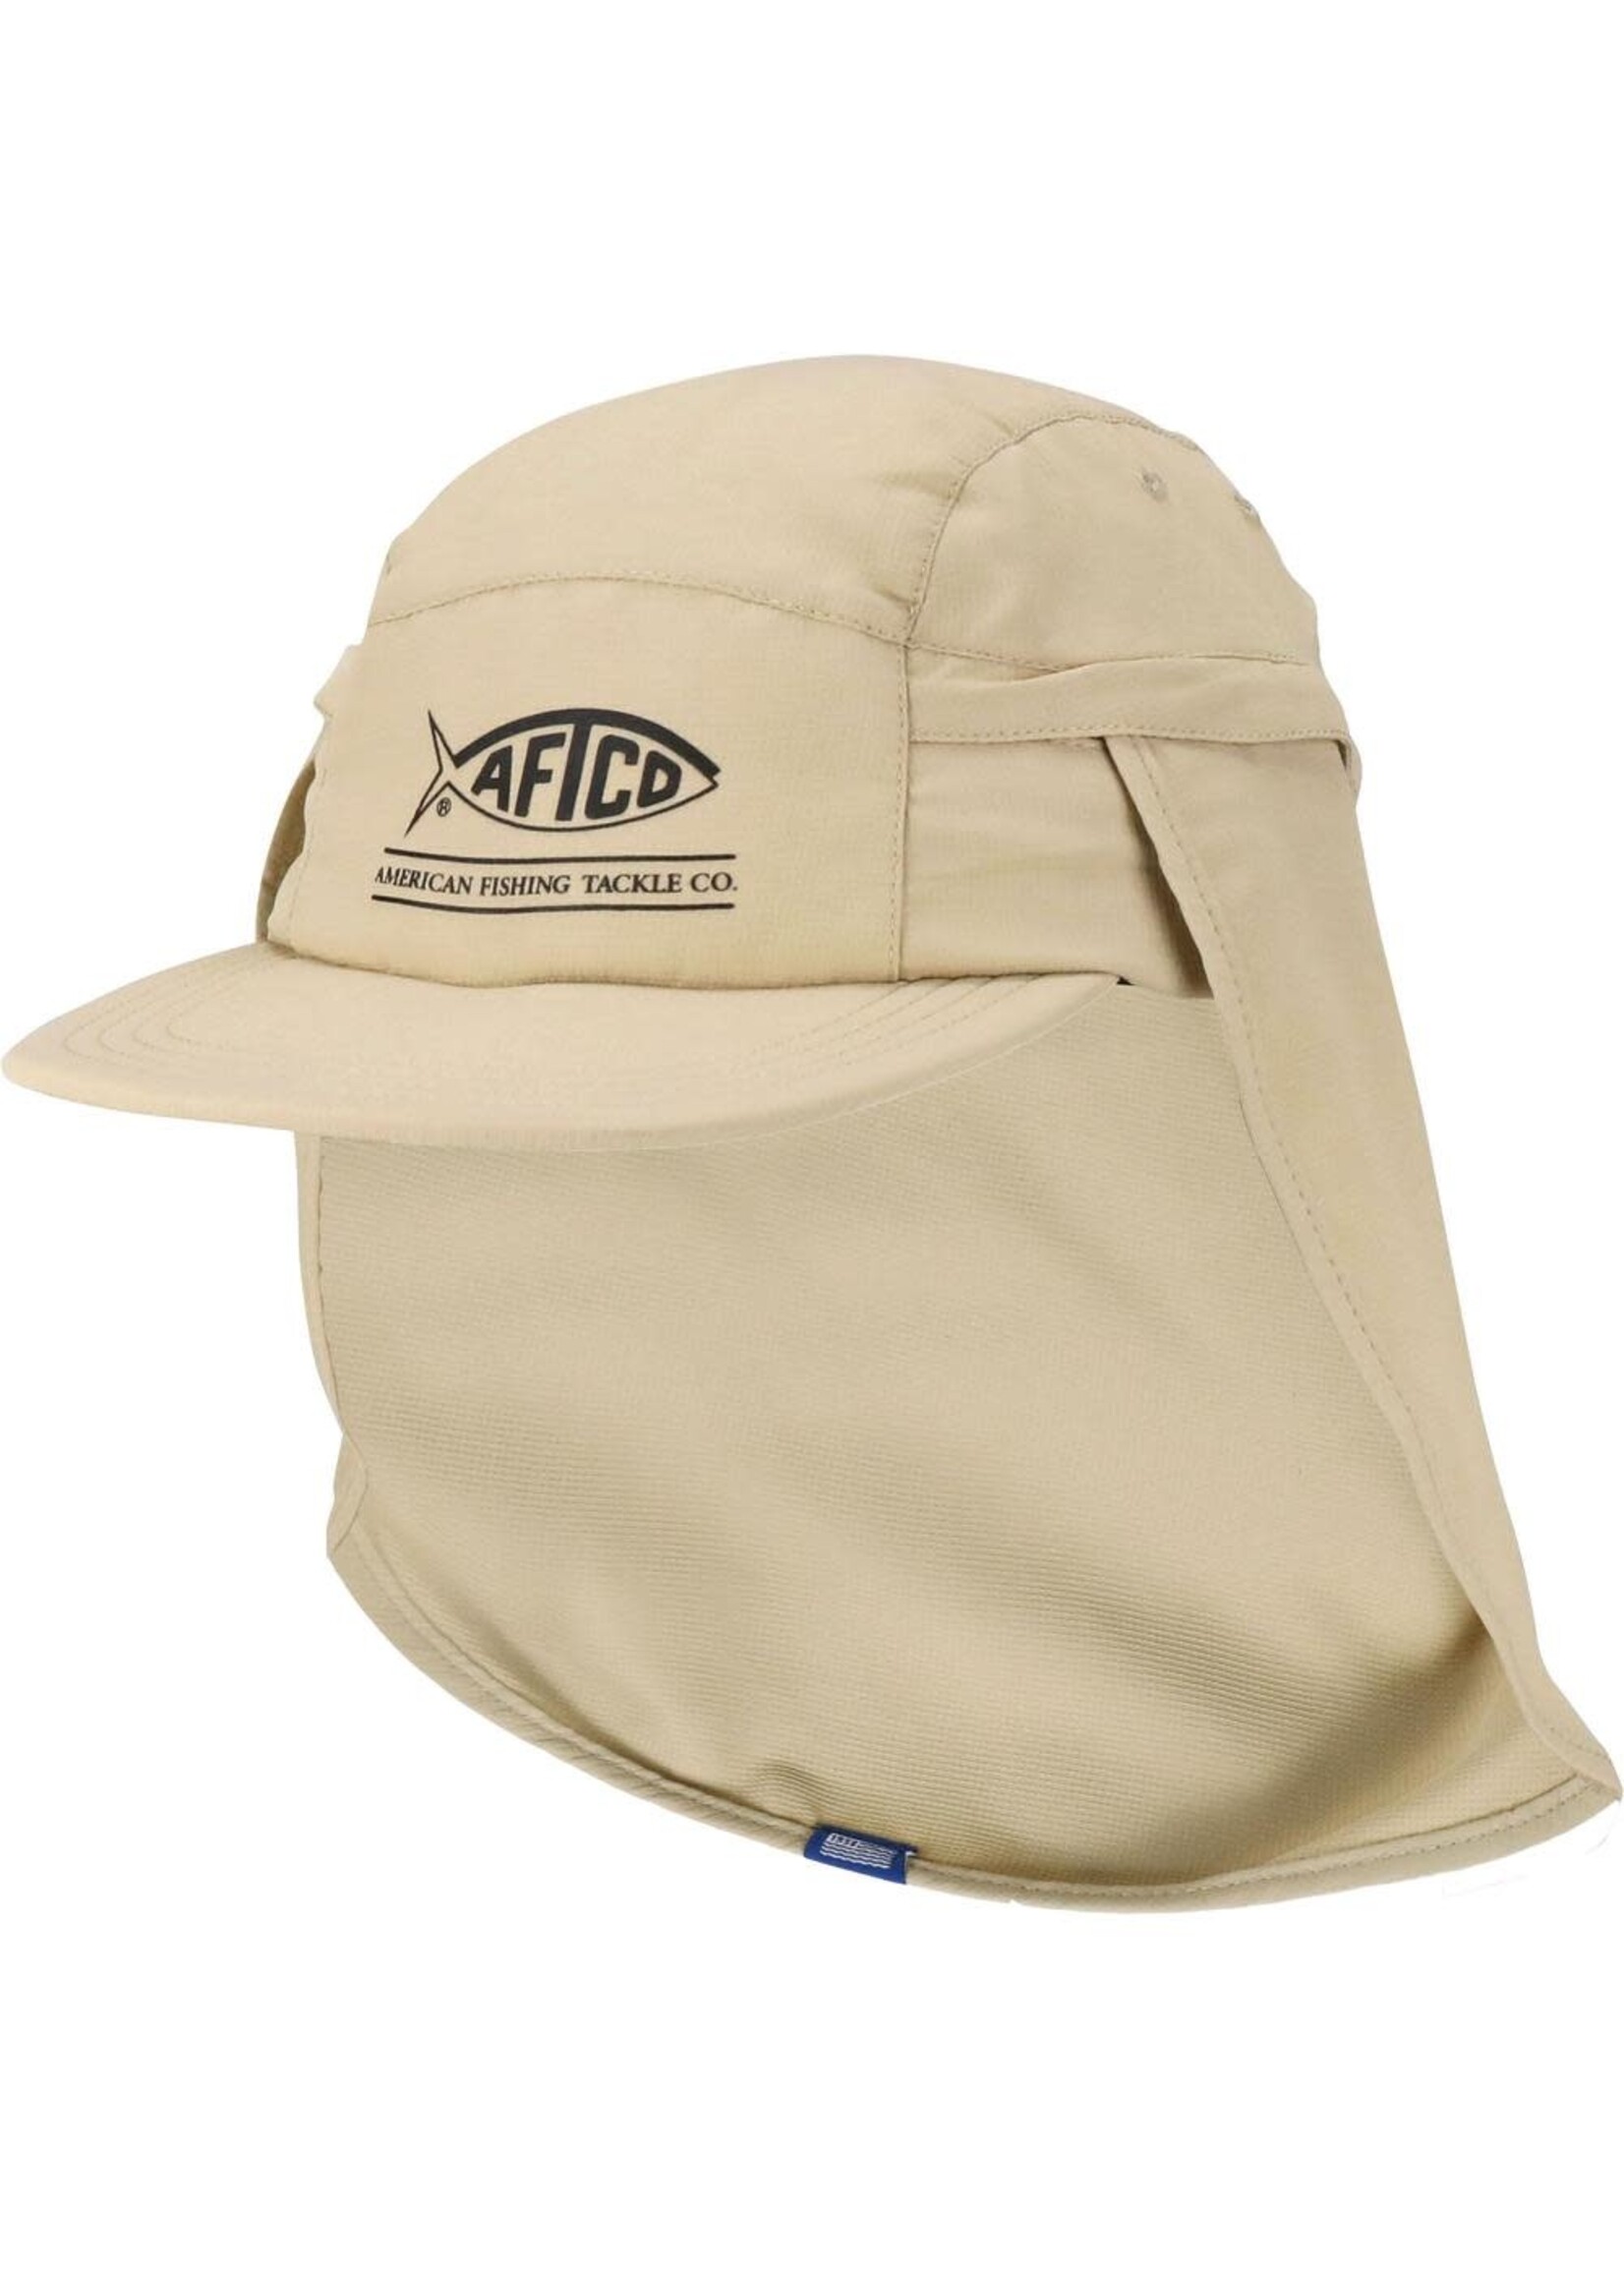 AFTCO Fishing Guide Hat - Tackle Shack